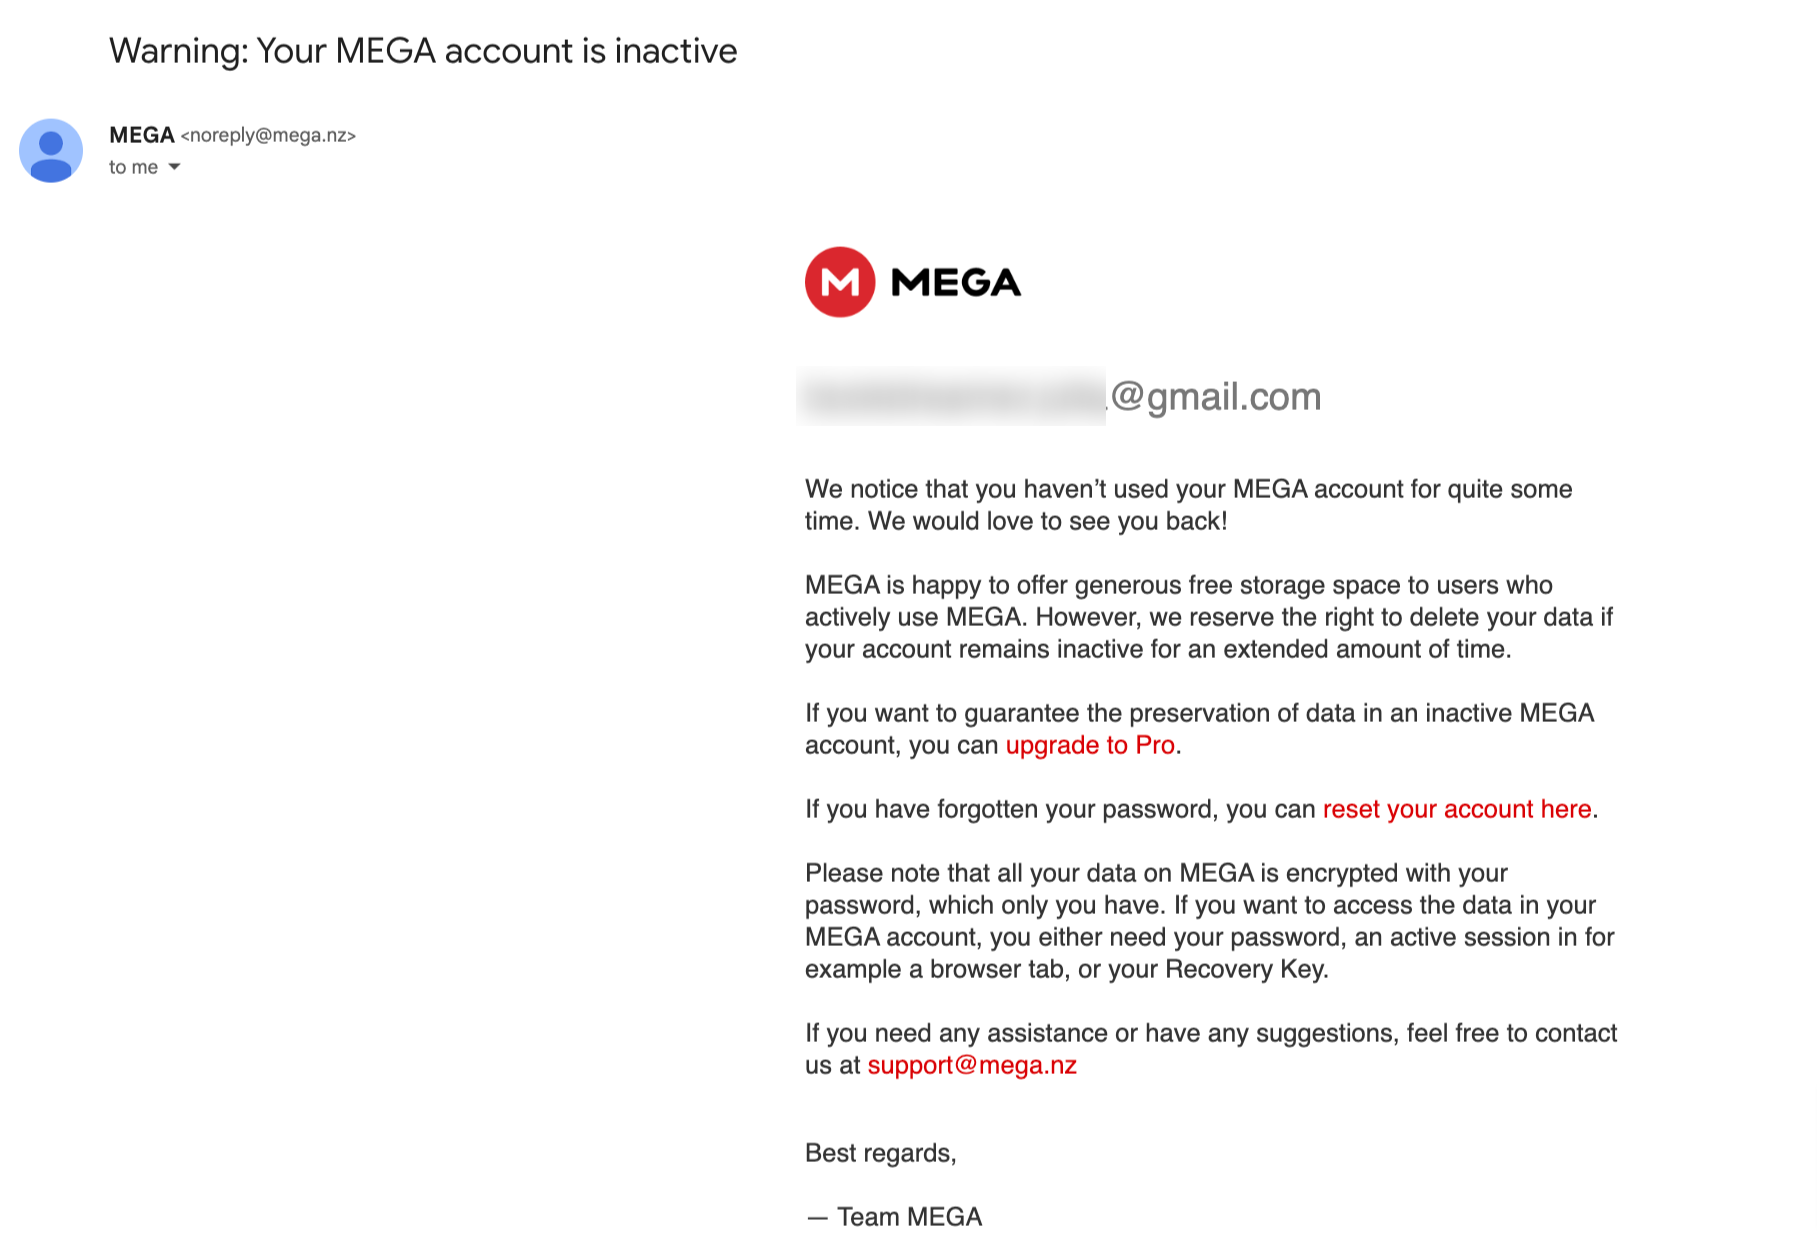 Account Removal Emails: Screenshot of Mega's account notification email about inactivity